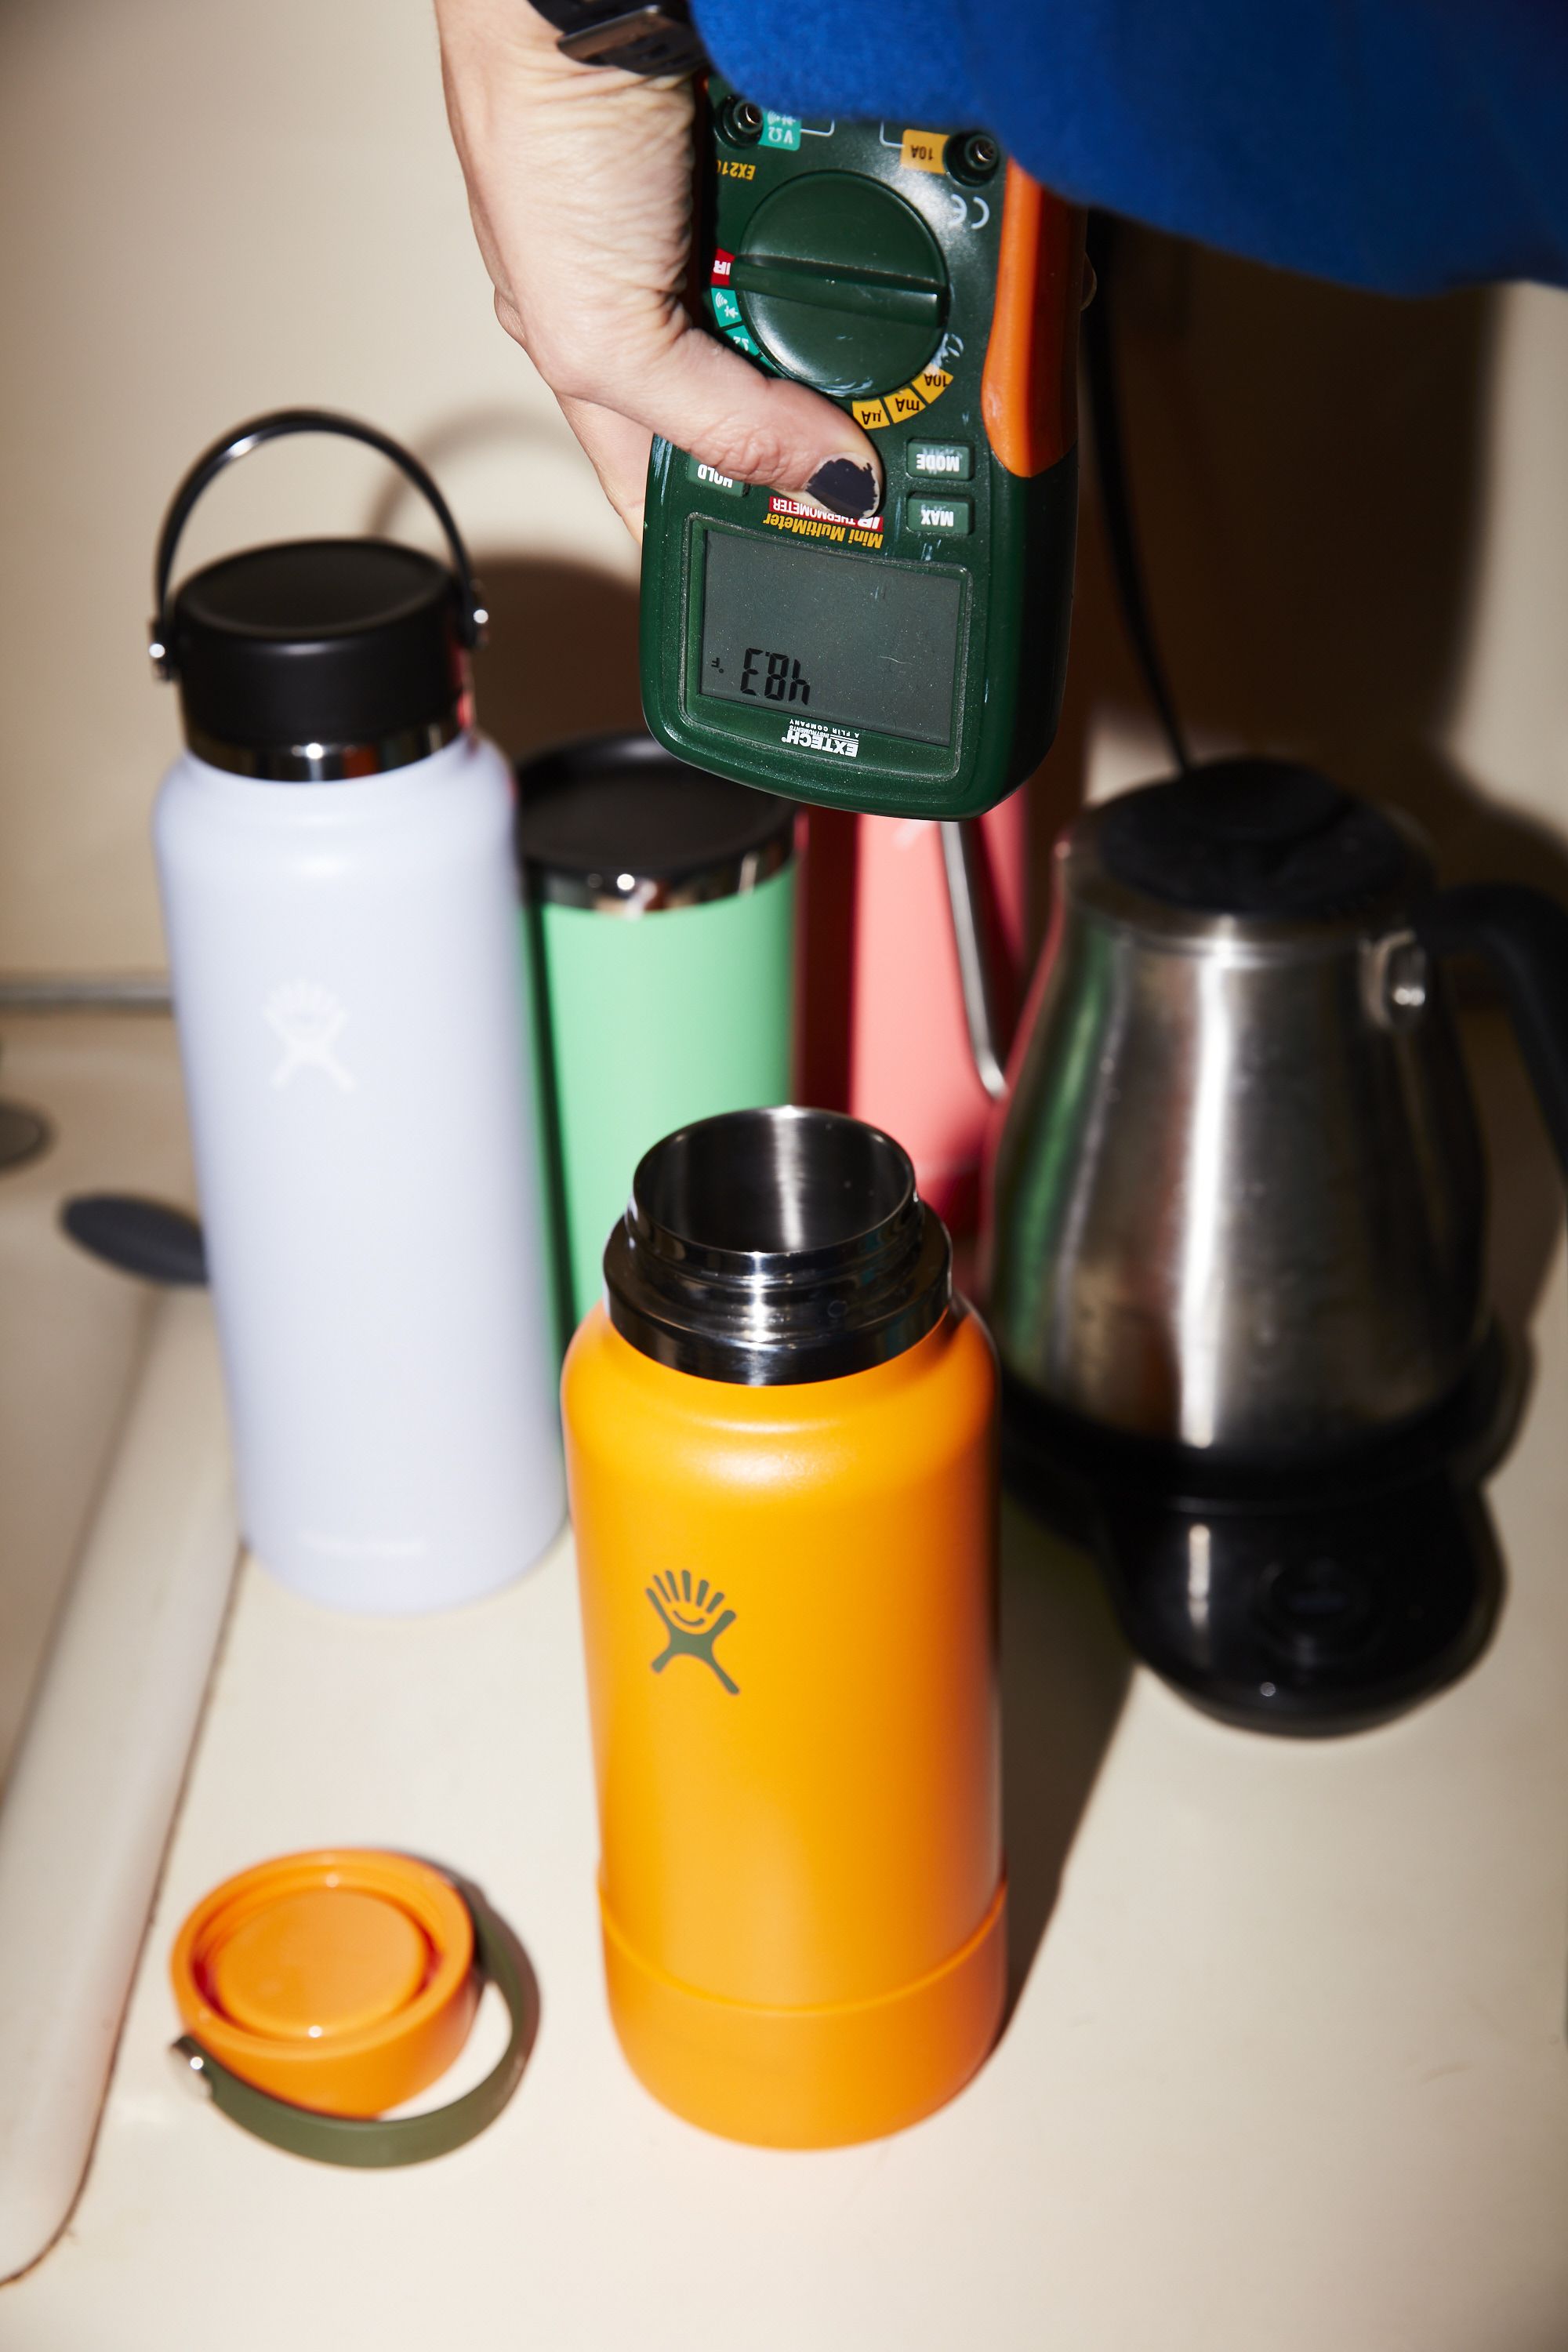 Save 30% On the Hydro Flask Bottle With 31,800+ 5-Star Reviews